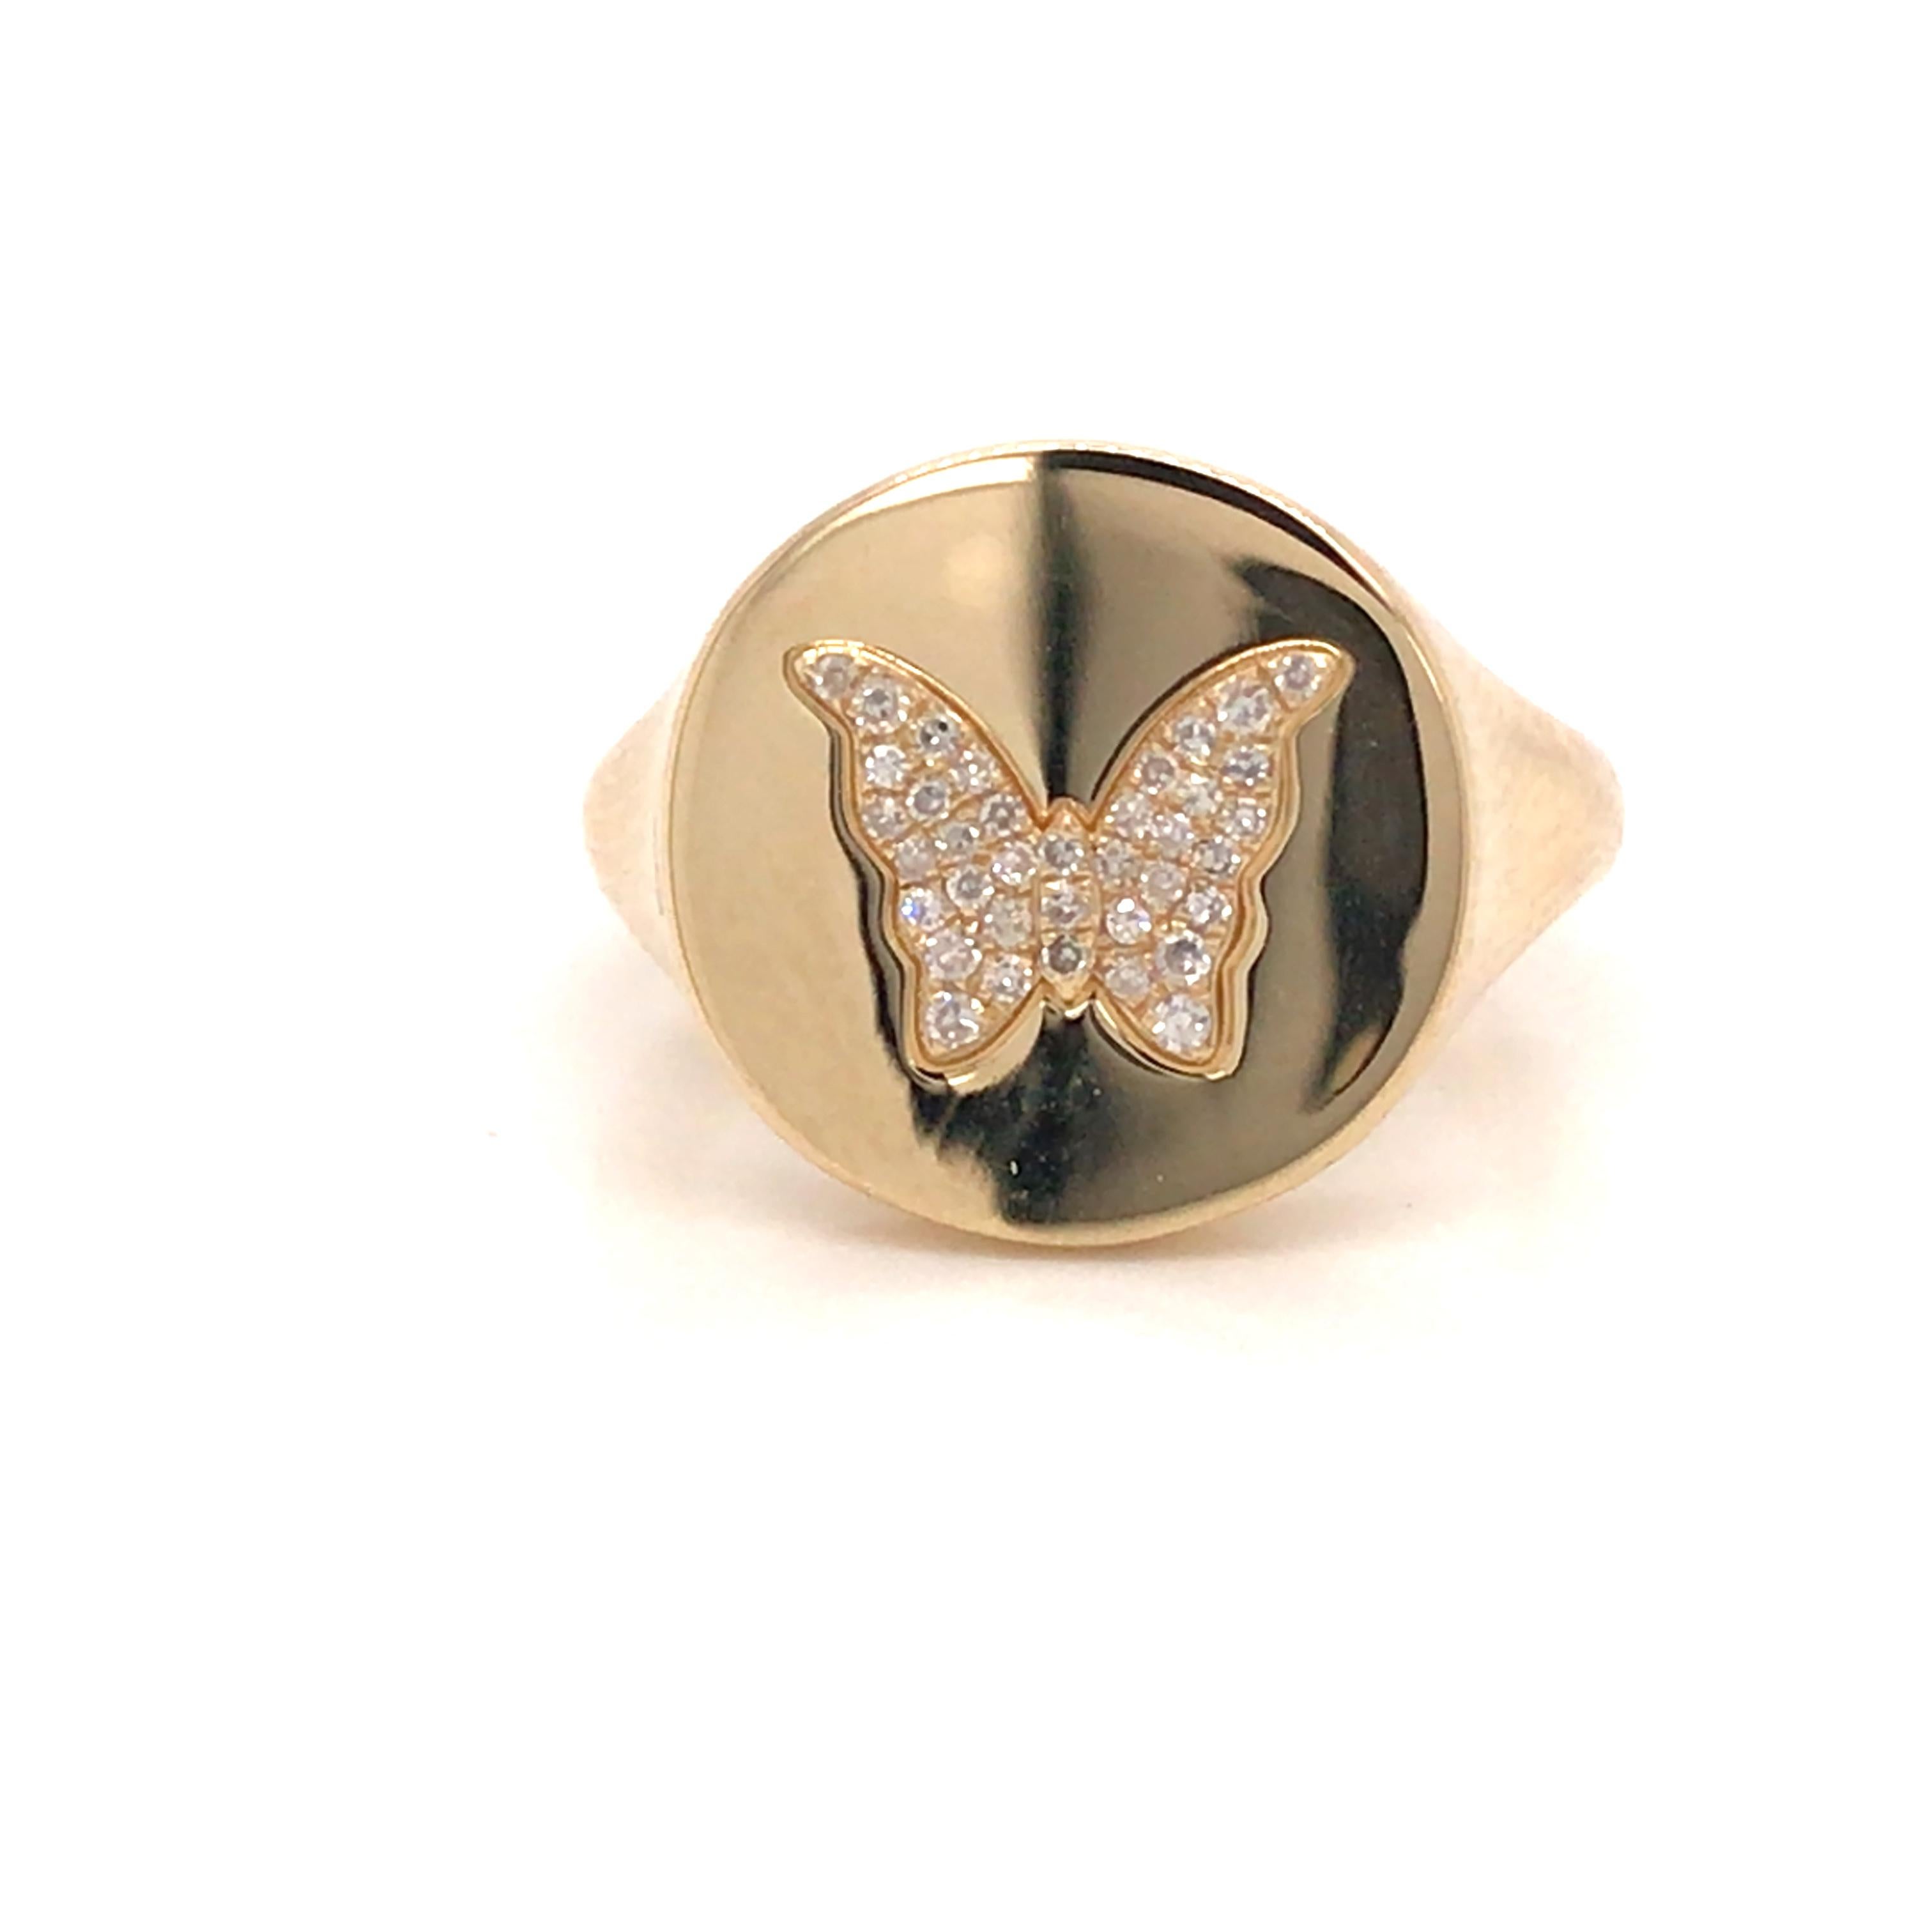 Diamond Butterfly Signet Ring in 14K Yellow Gold.  (37) Round Brilliant Cut Diamonds weighing 0.07 carat total weight, G-H in color and VS-SI in clarity are expertly set.  The Ring measures 1/2 inch in diameter. Ring size 4.  3.14 grams.